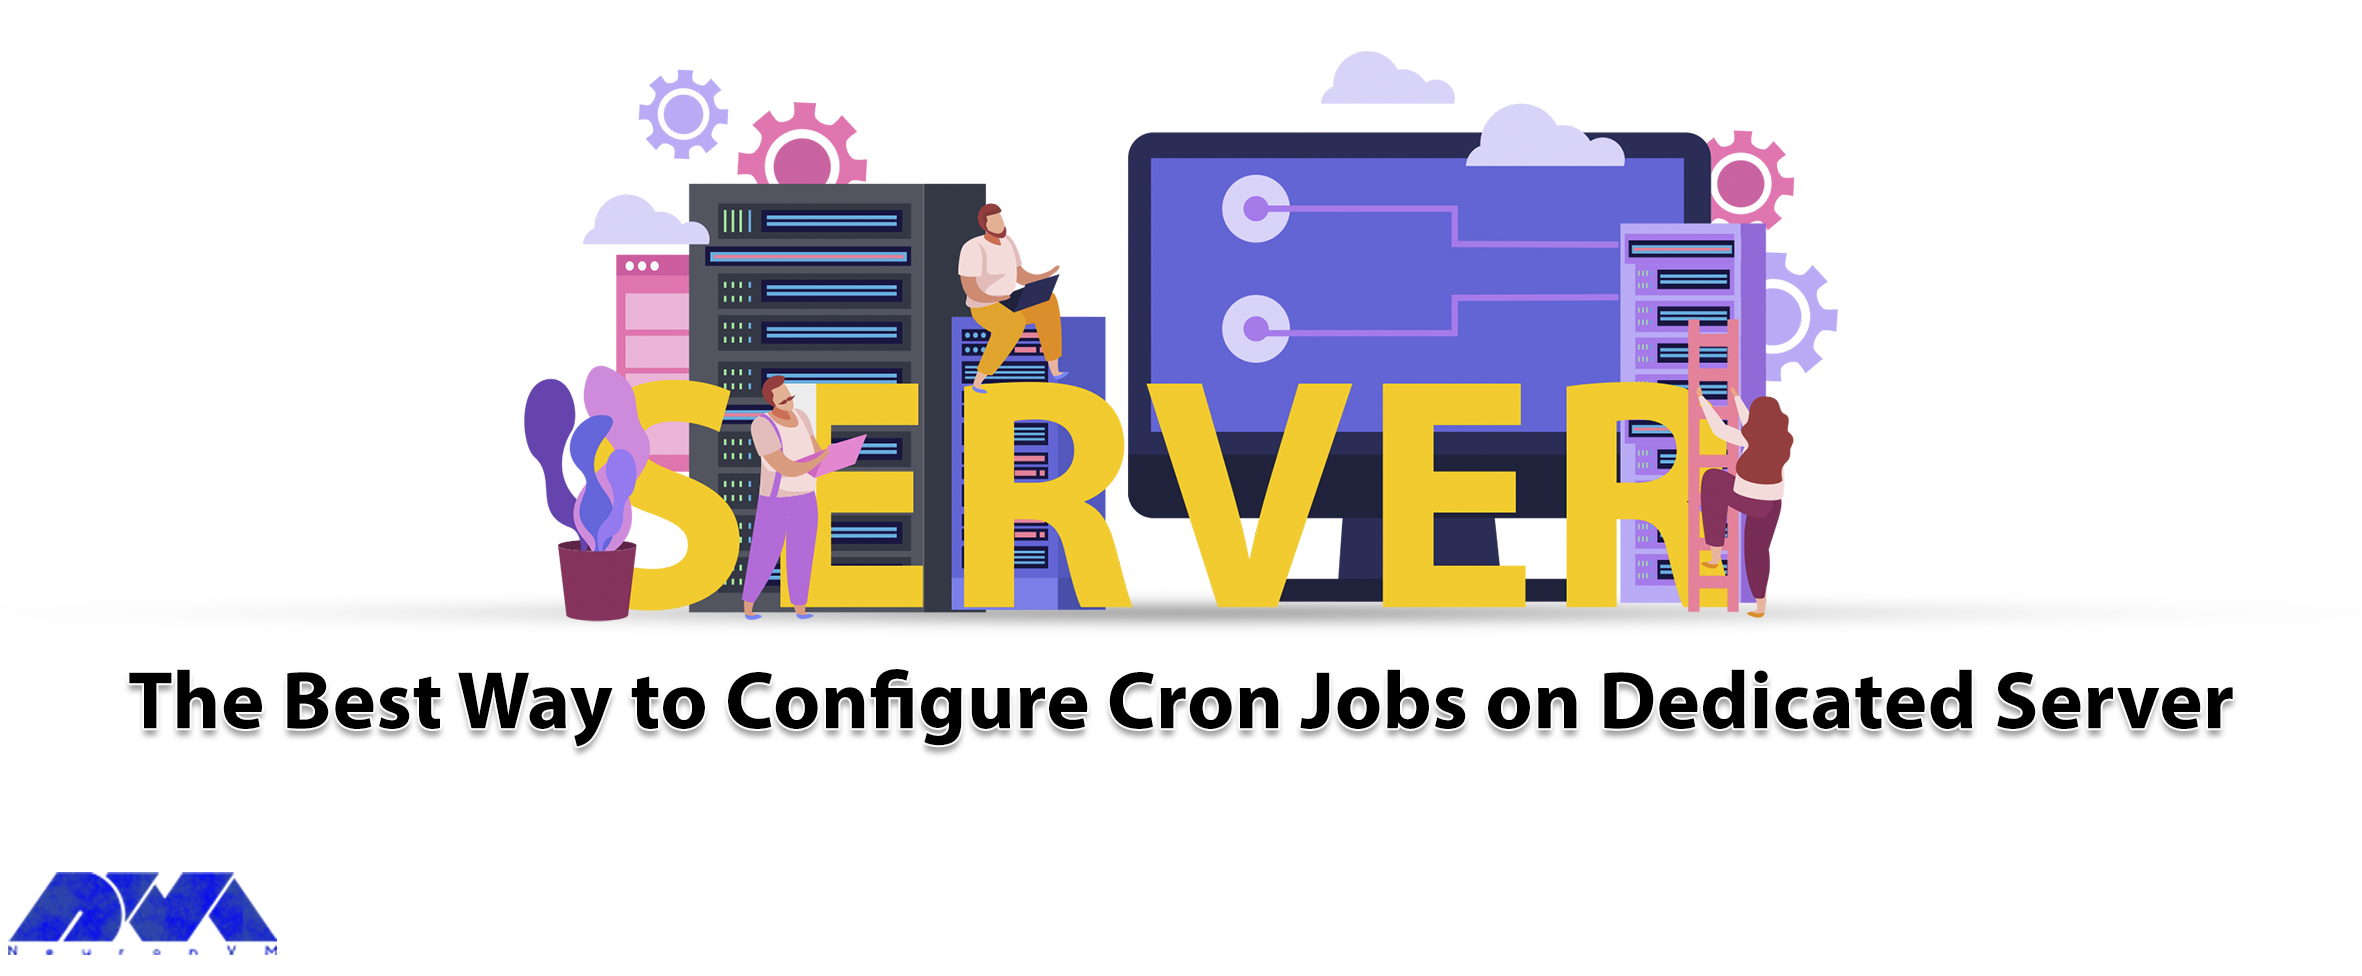 The Best Way to Configure Cron Jobs on Dedicated Server